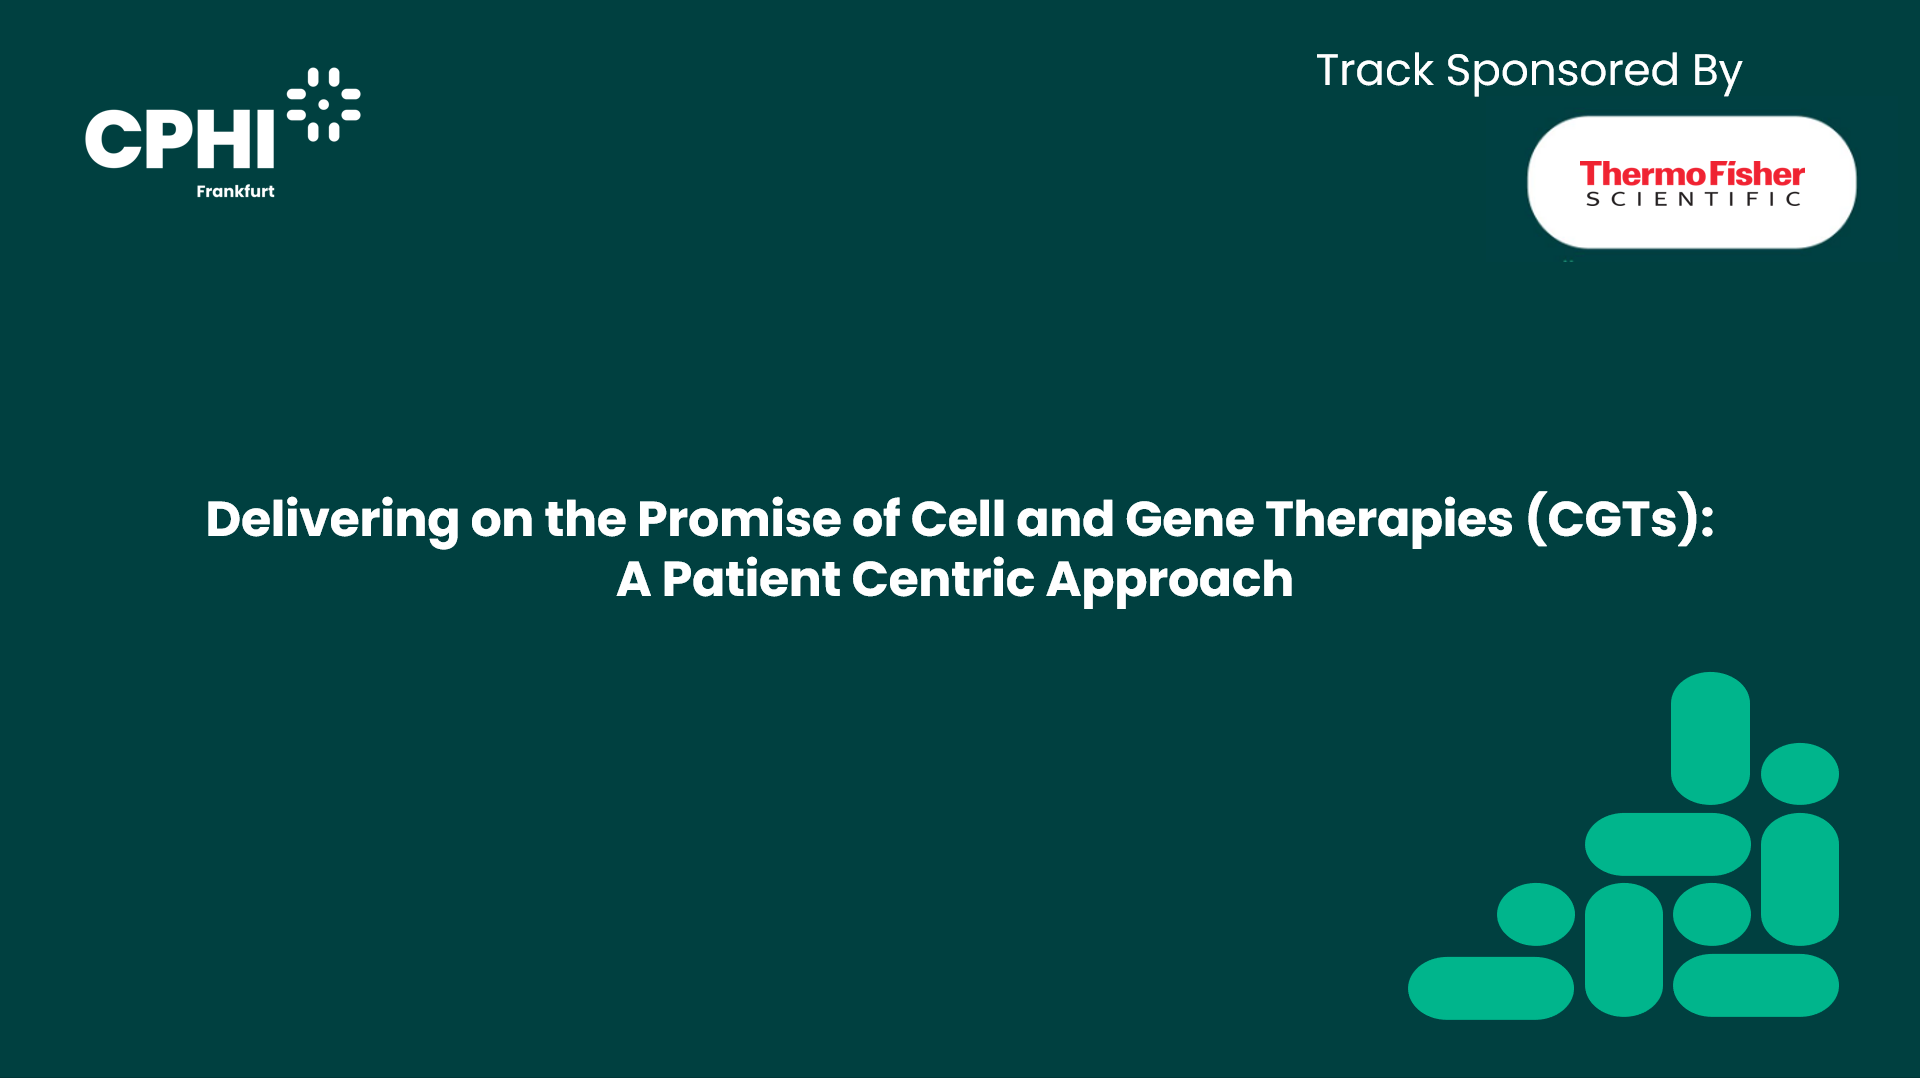 Delivering on the promise of cell and gene therapies: a patient-centric approach